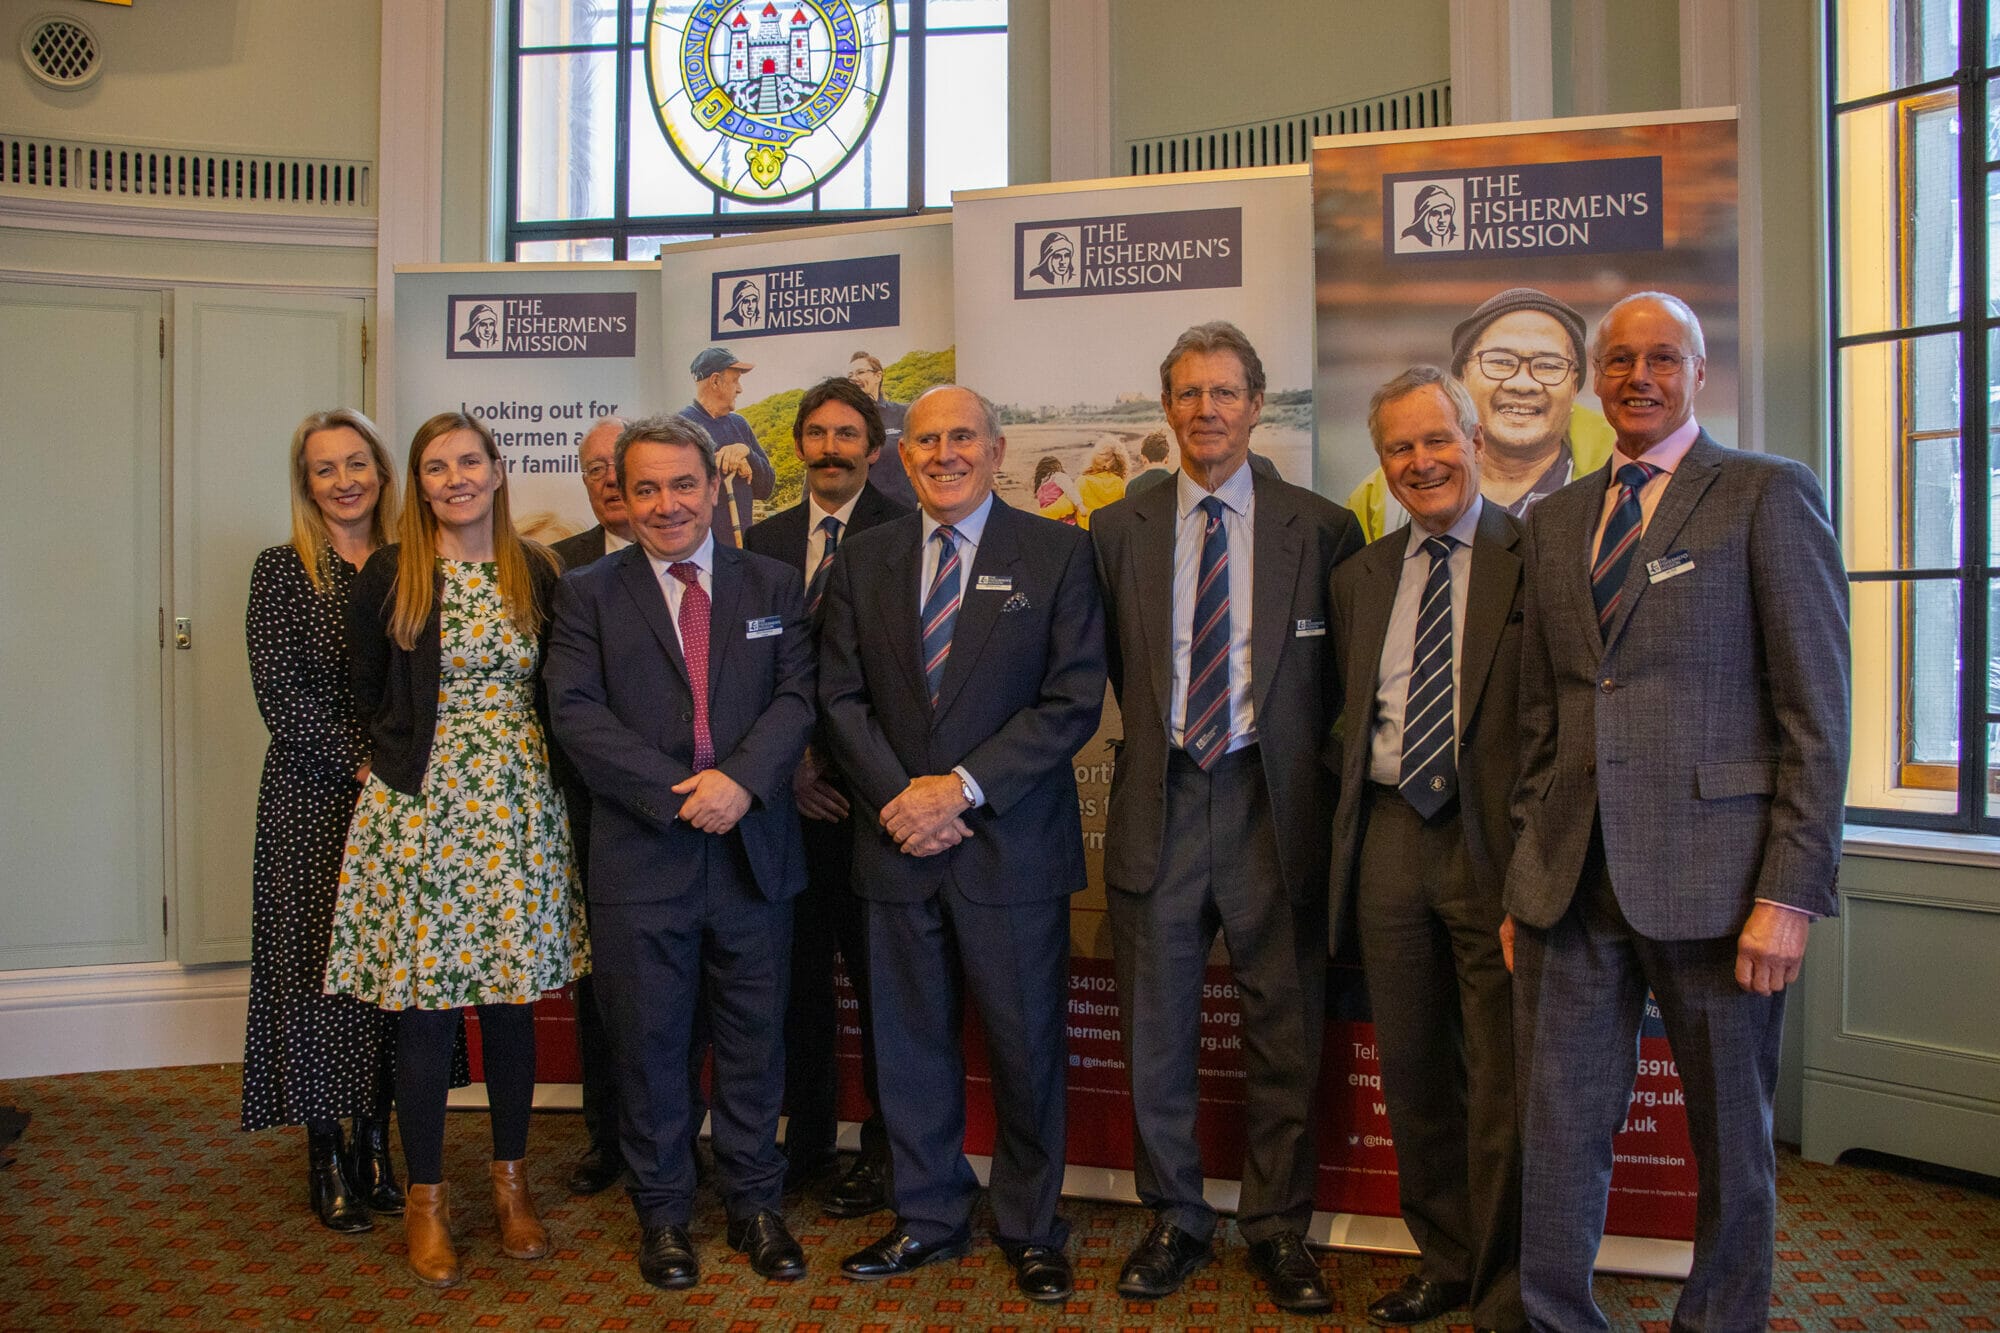 A group of Trustees standing in front of pop up banners.